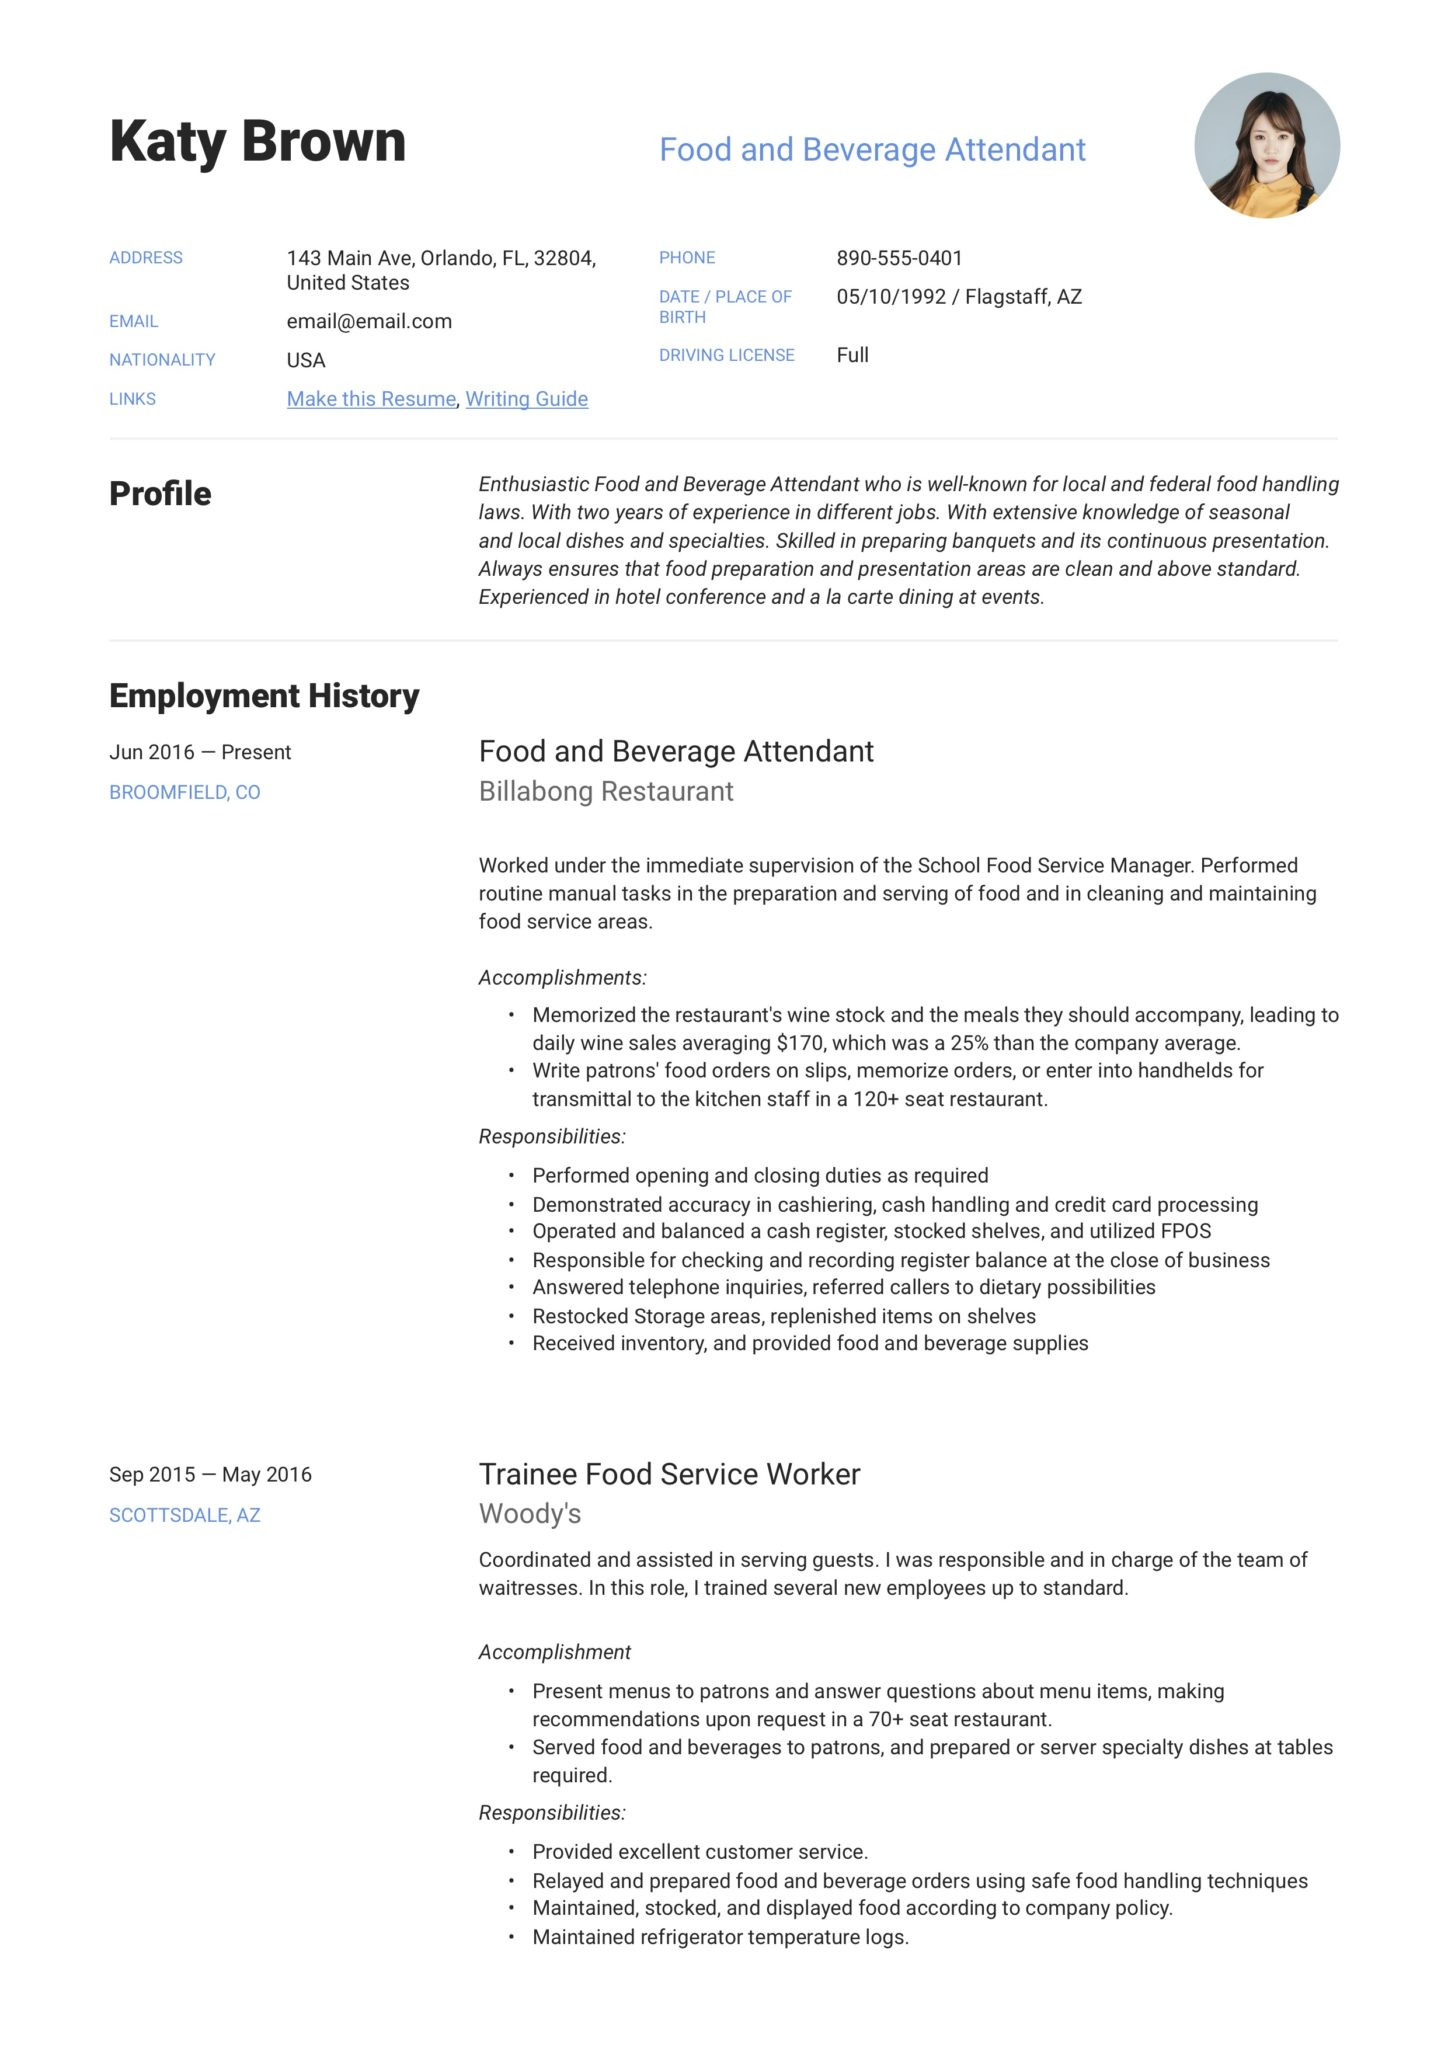 Food and Beverage attendant Resume Sample What Does A Food and Beverage assistant Do